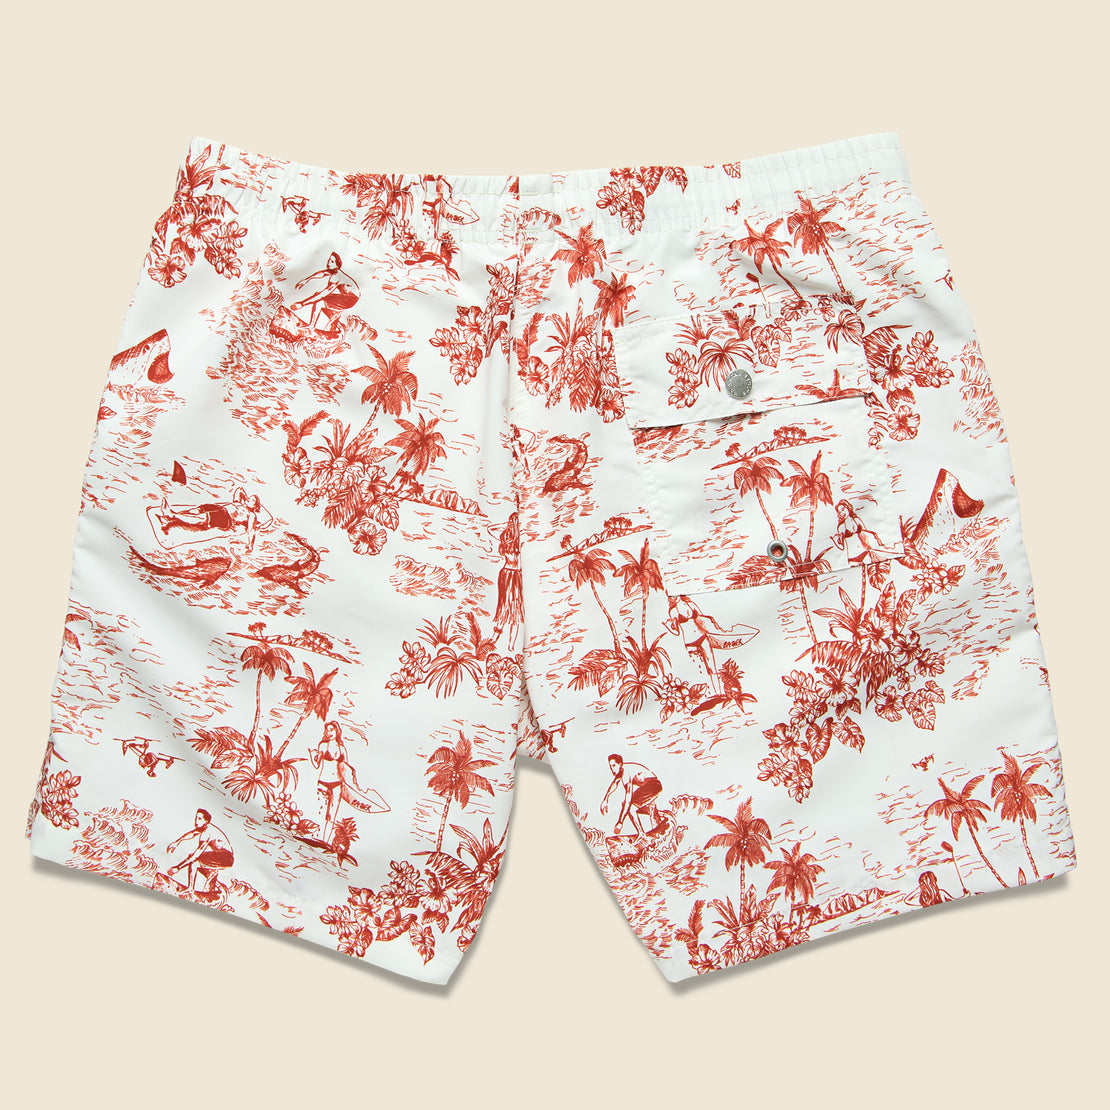 Canadian Toile Swim Trunk - Red/White - Bather Trunk Co. - STAG Provisions - Shorts - Swim